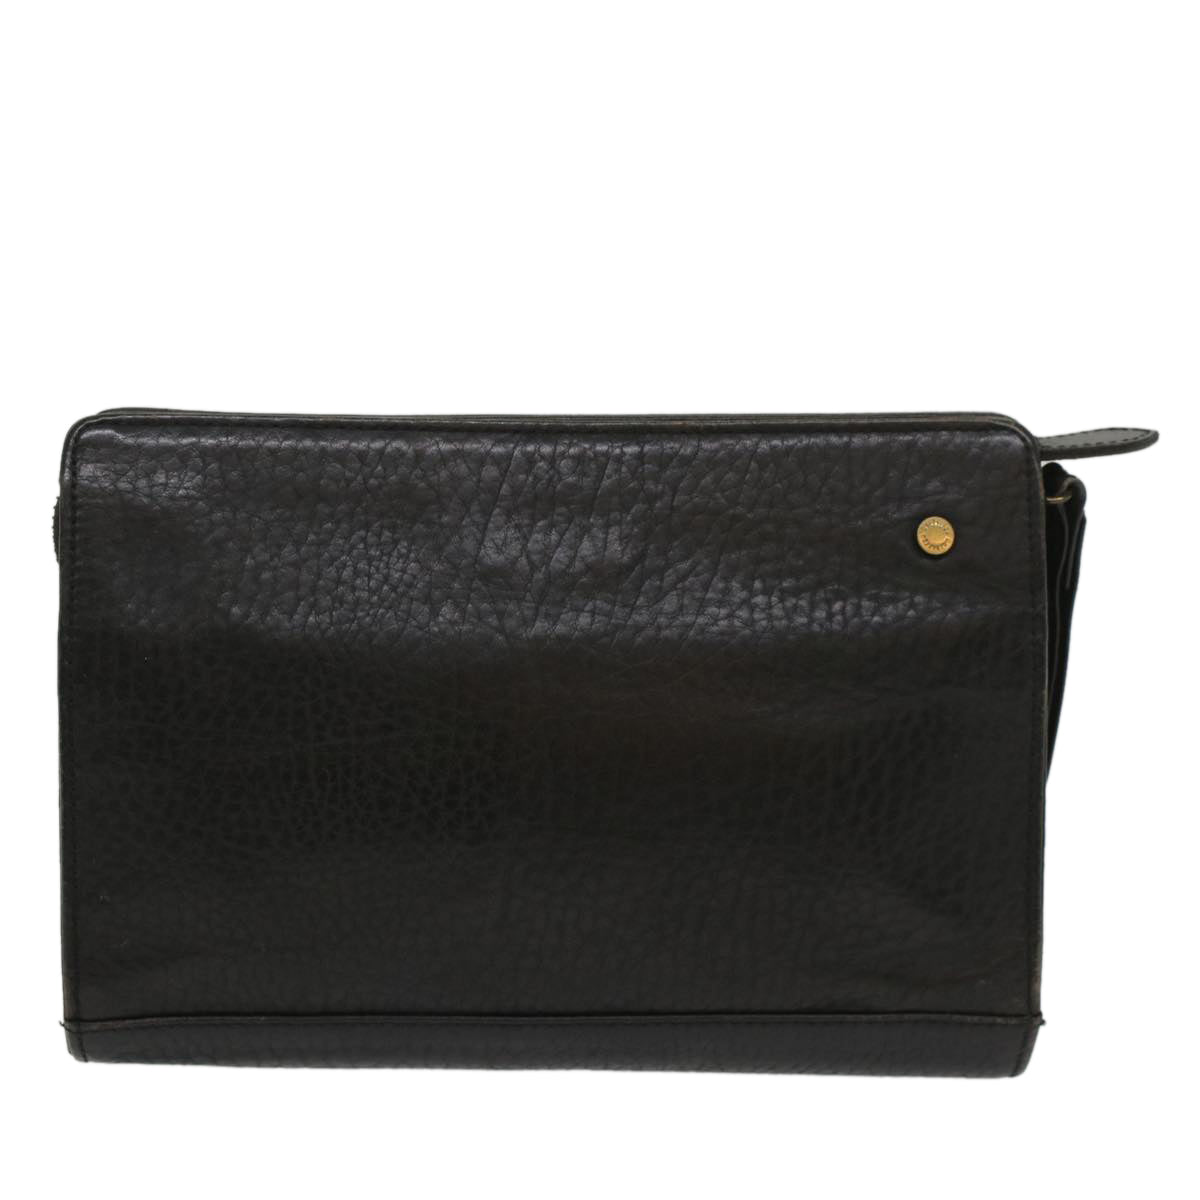 Burberrys Clutch Bag Leather Black Auth bs8538 - 0